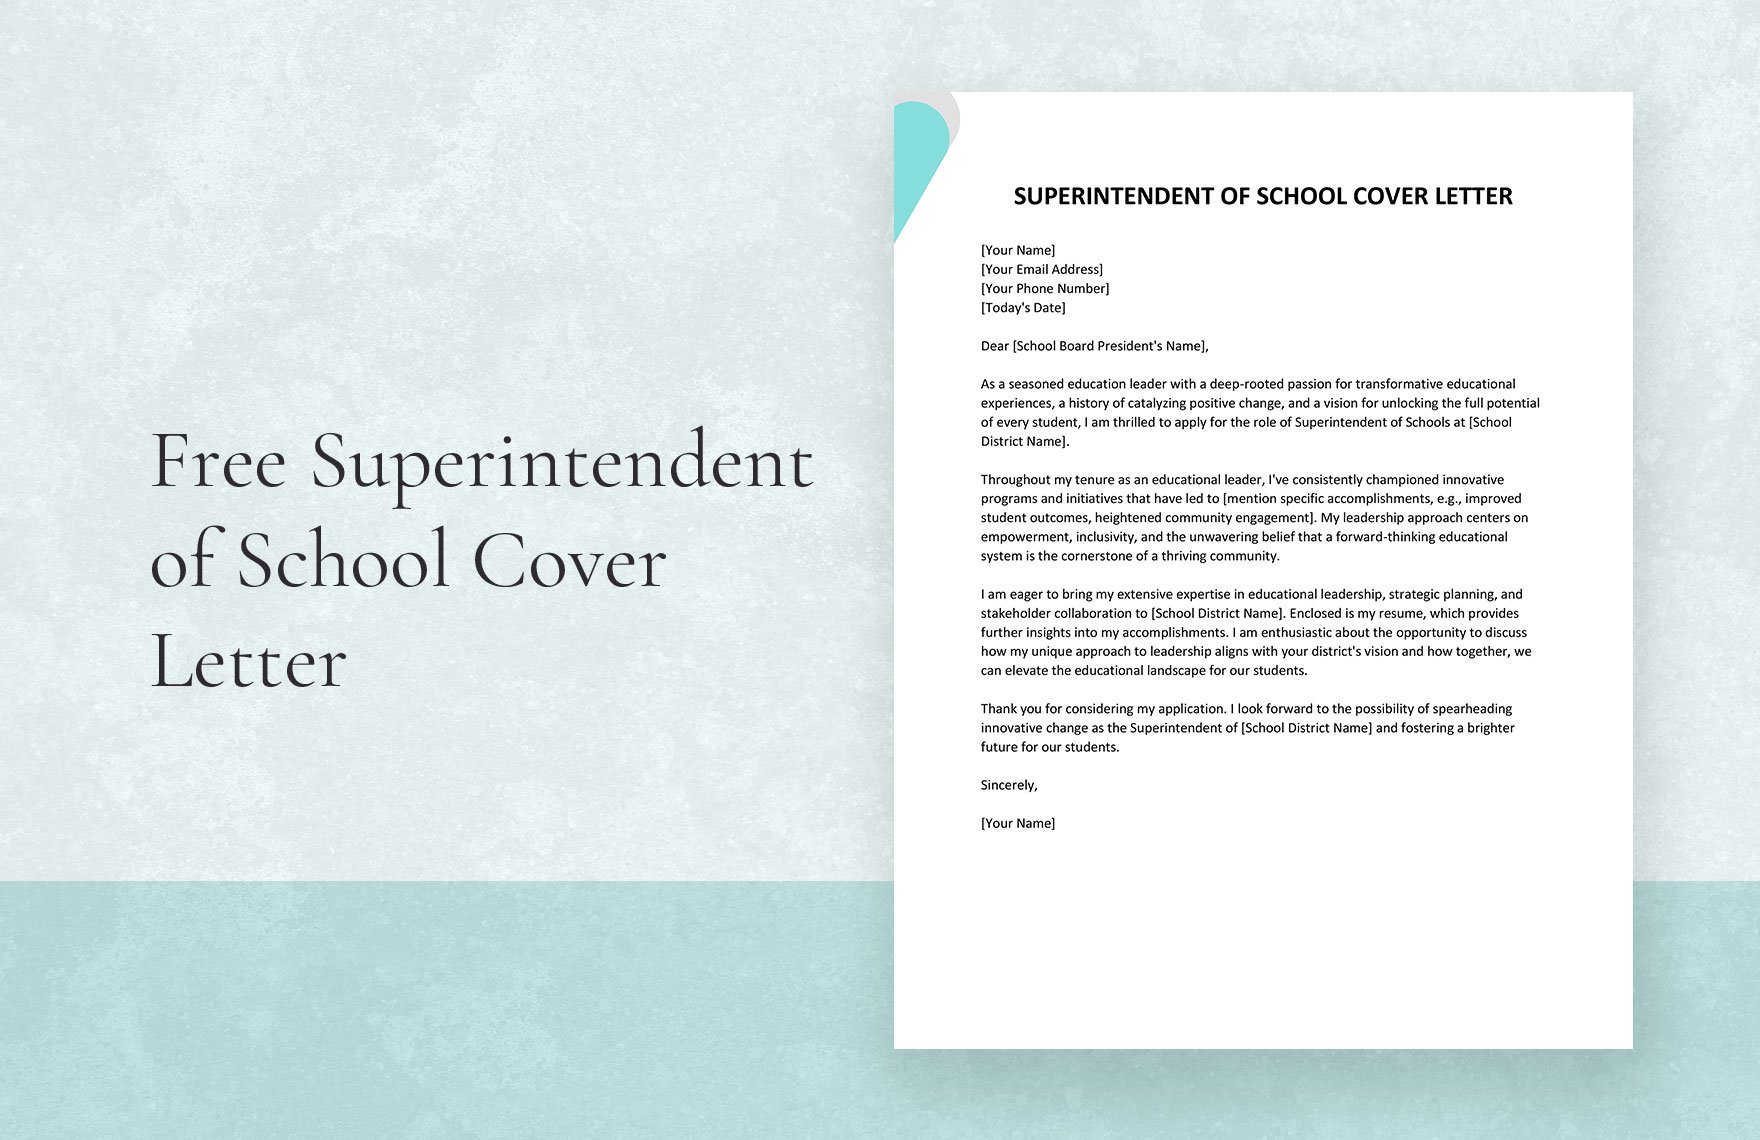 Superintendent of School Cover Letter in Word, Google Docs